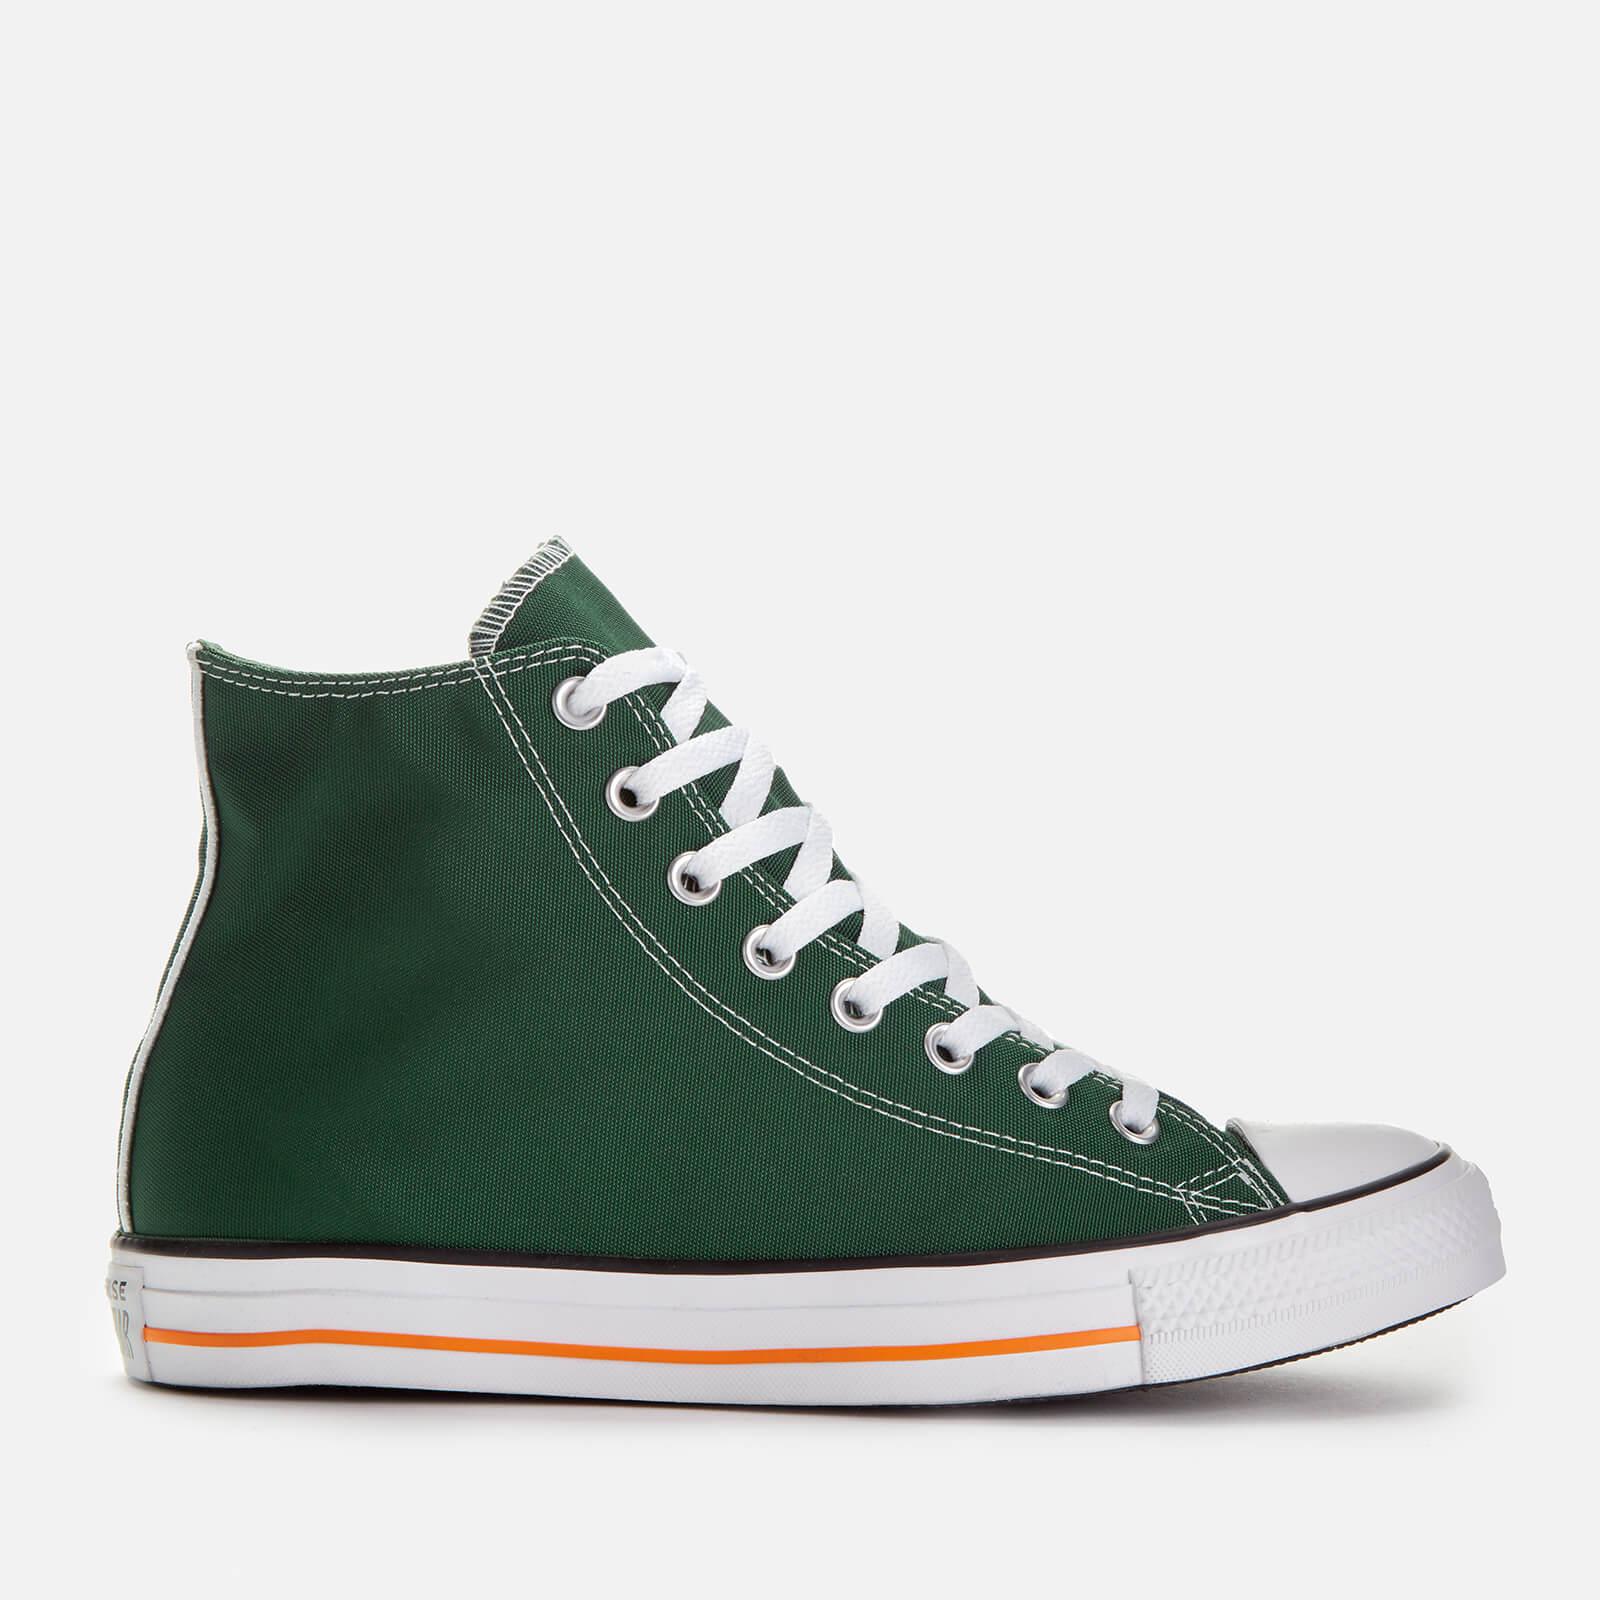 Converse Chuck Taylor All Star Hi-top Trainers in Green for Men - Lyst